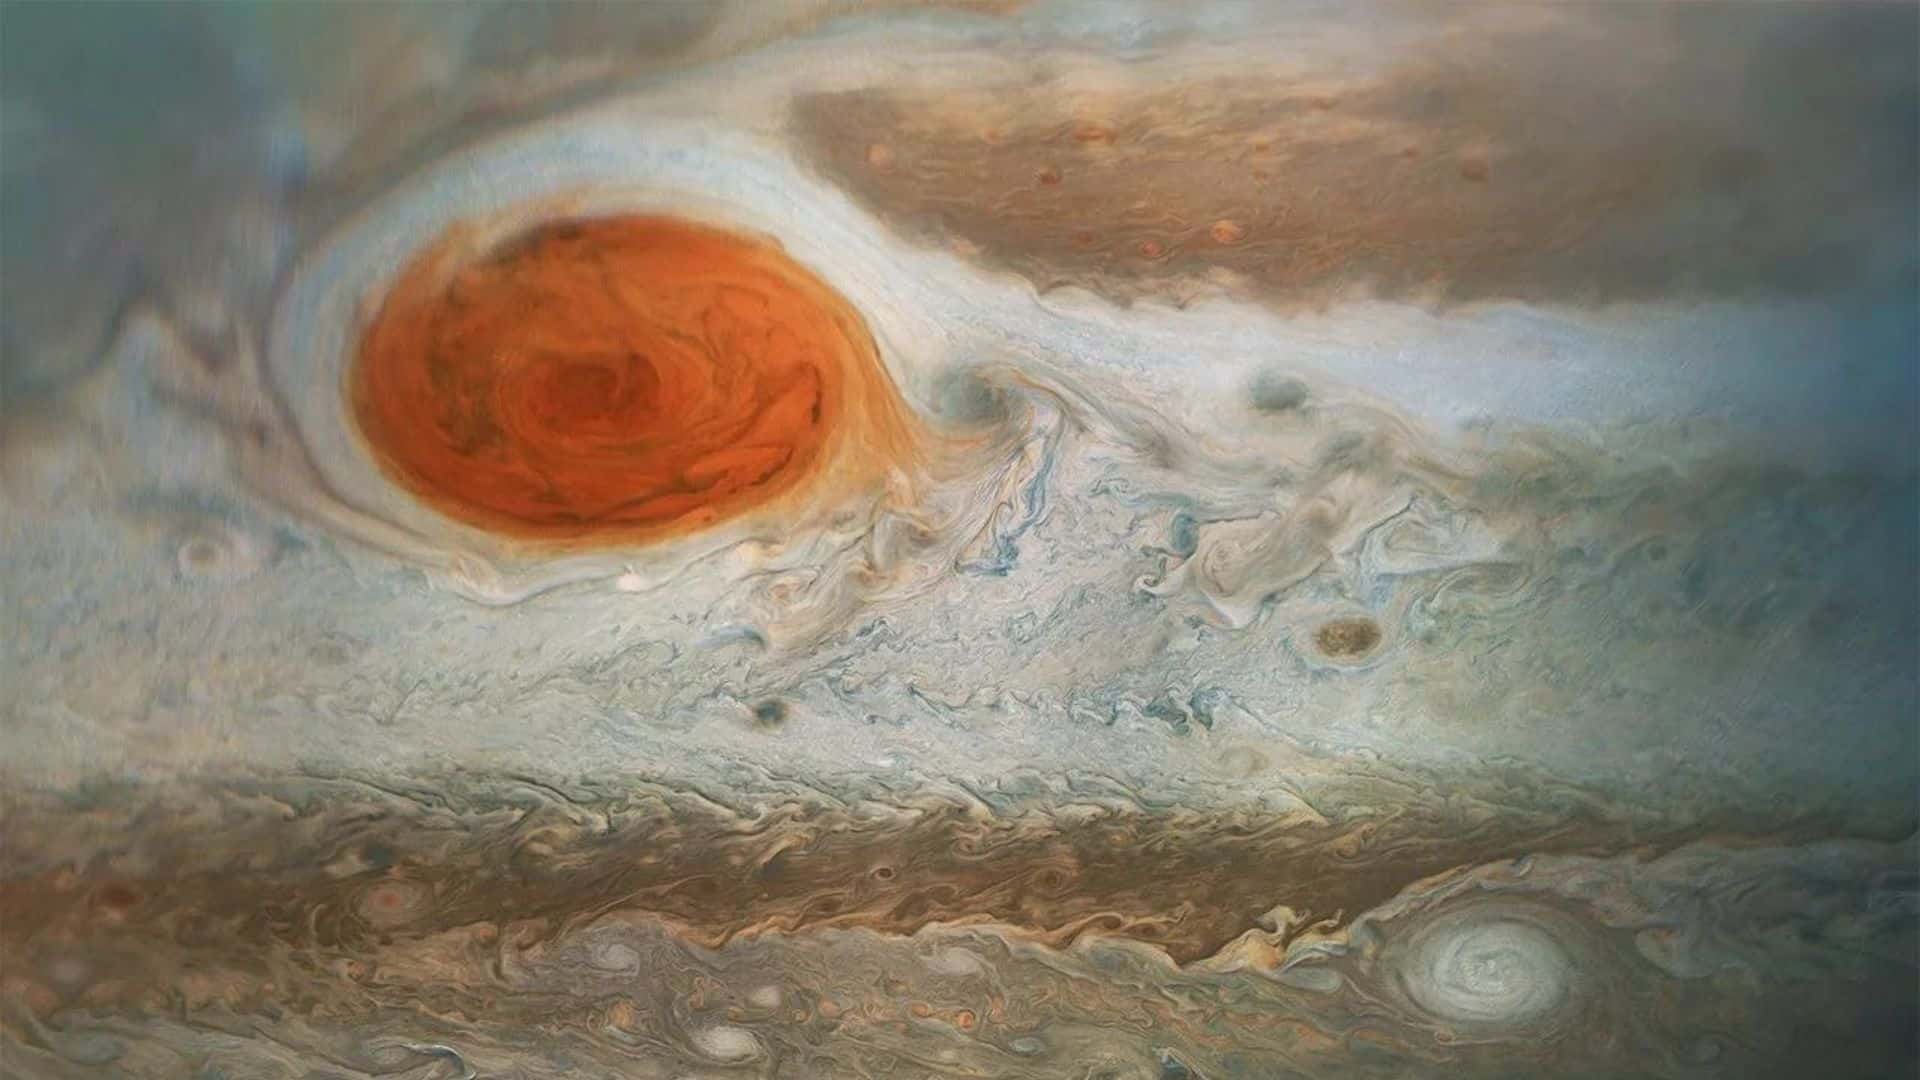 Jupiter’s iconic Great Red Spot, as seen from NASA's Juno spacecraft in 2018